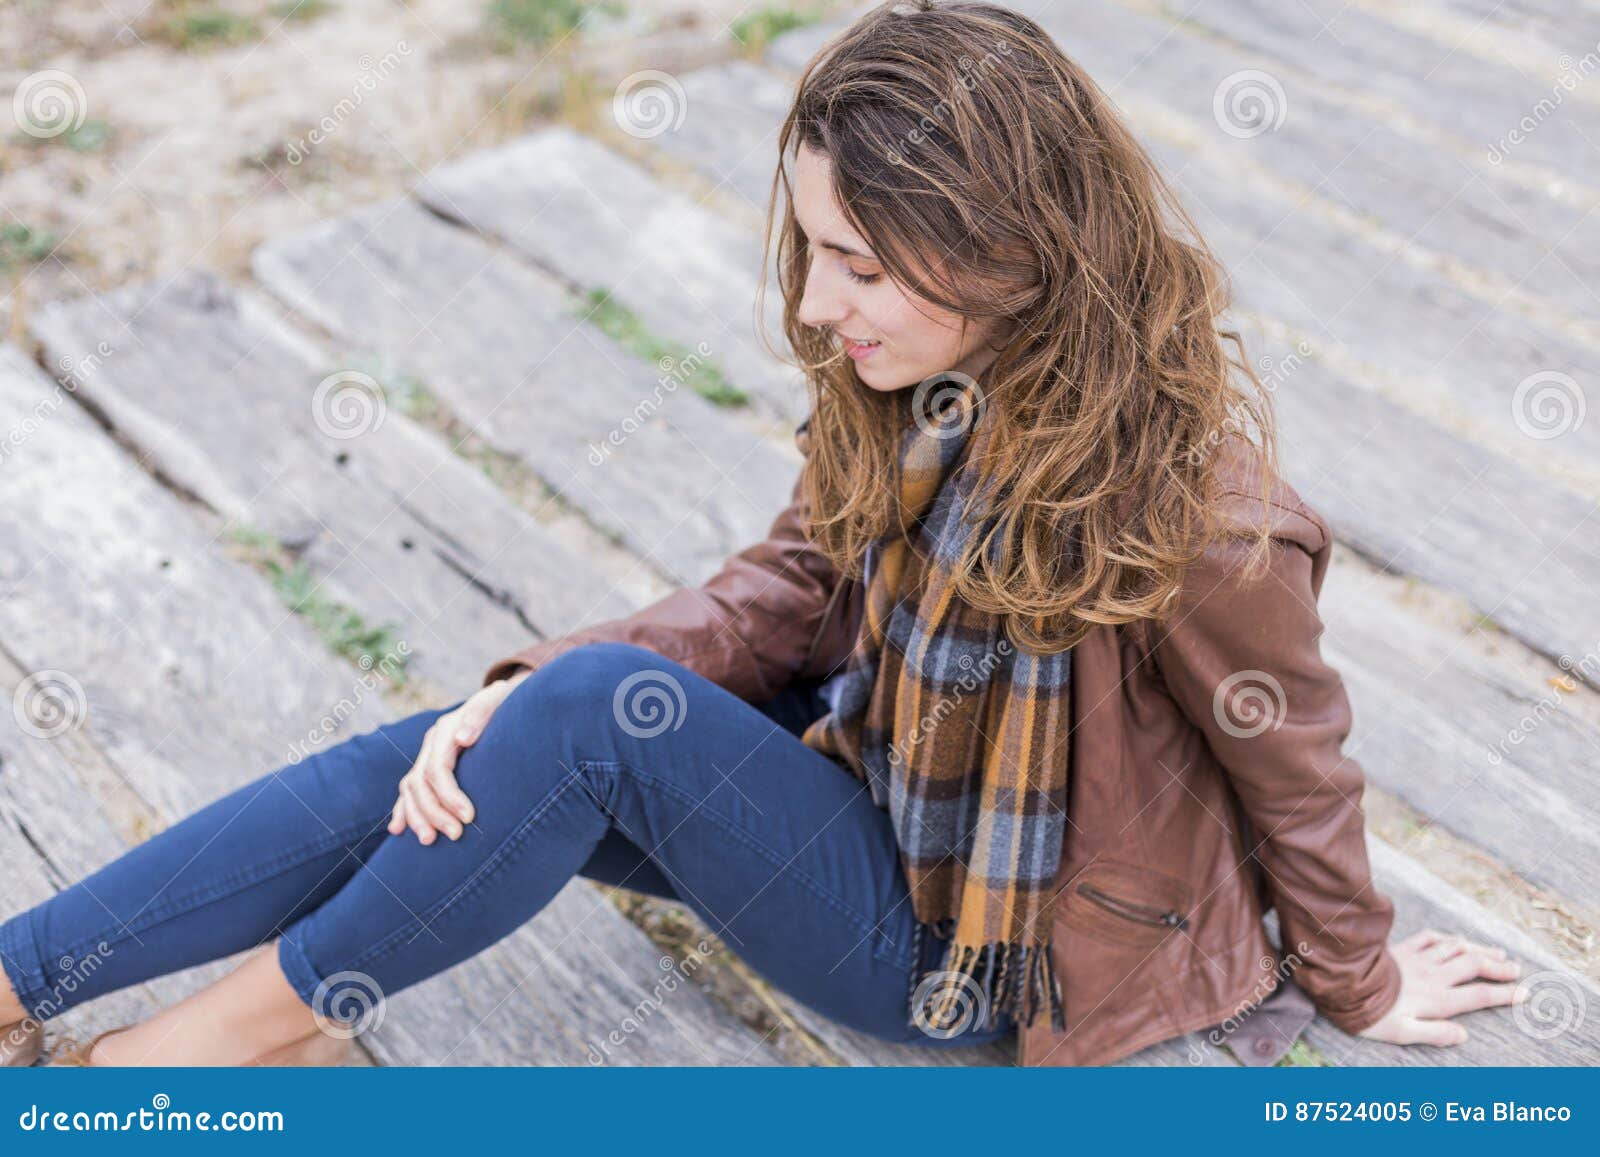 outdoors portrait of a young woman with brown jacket, jeans and